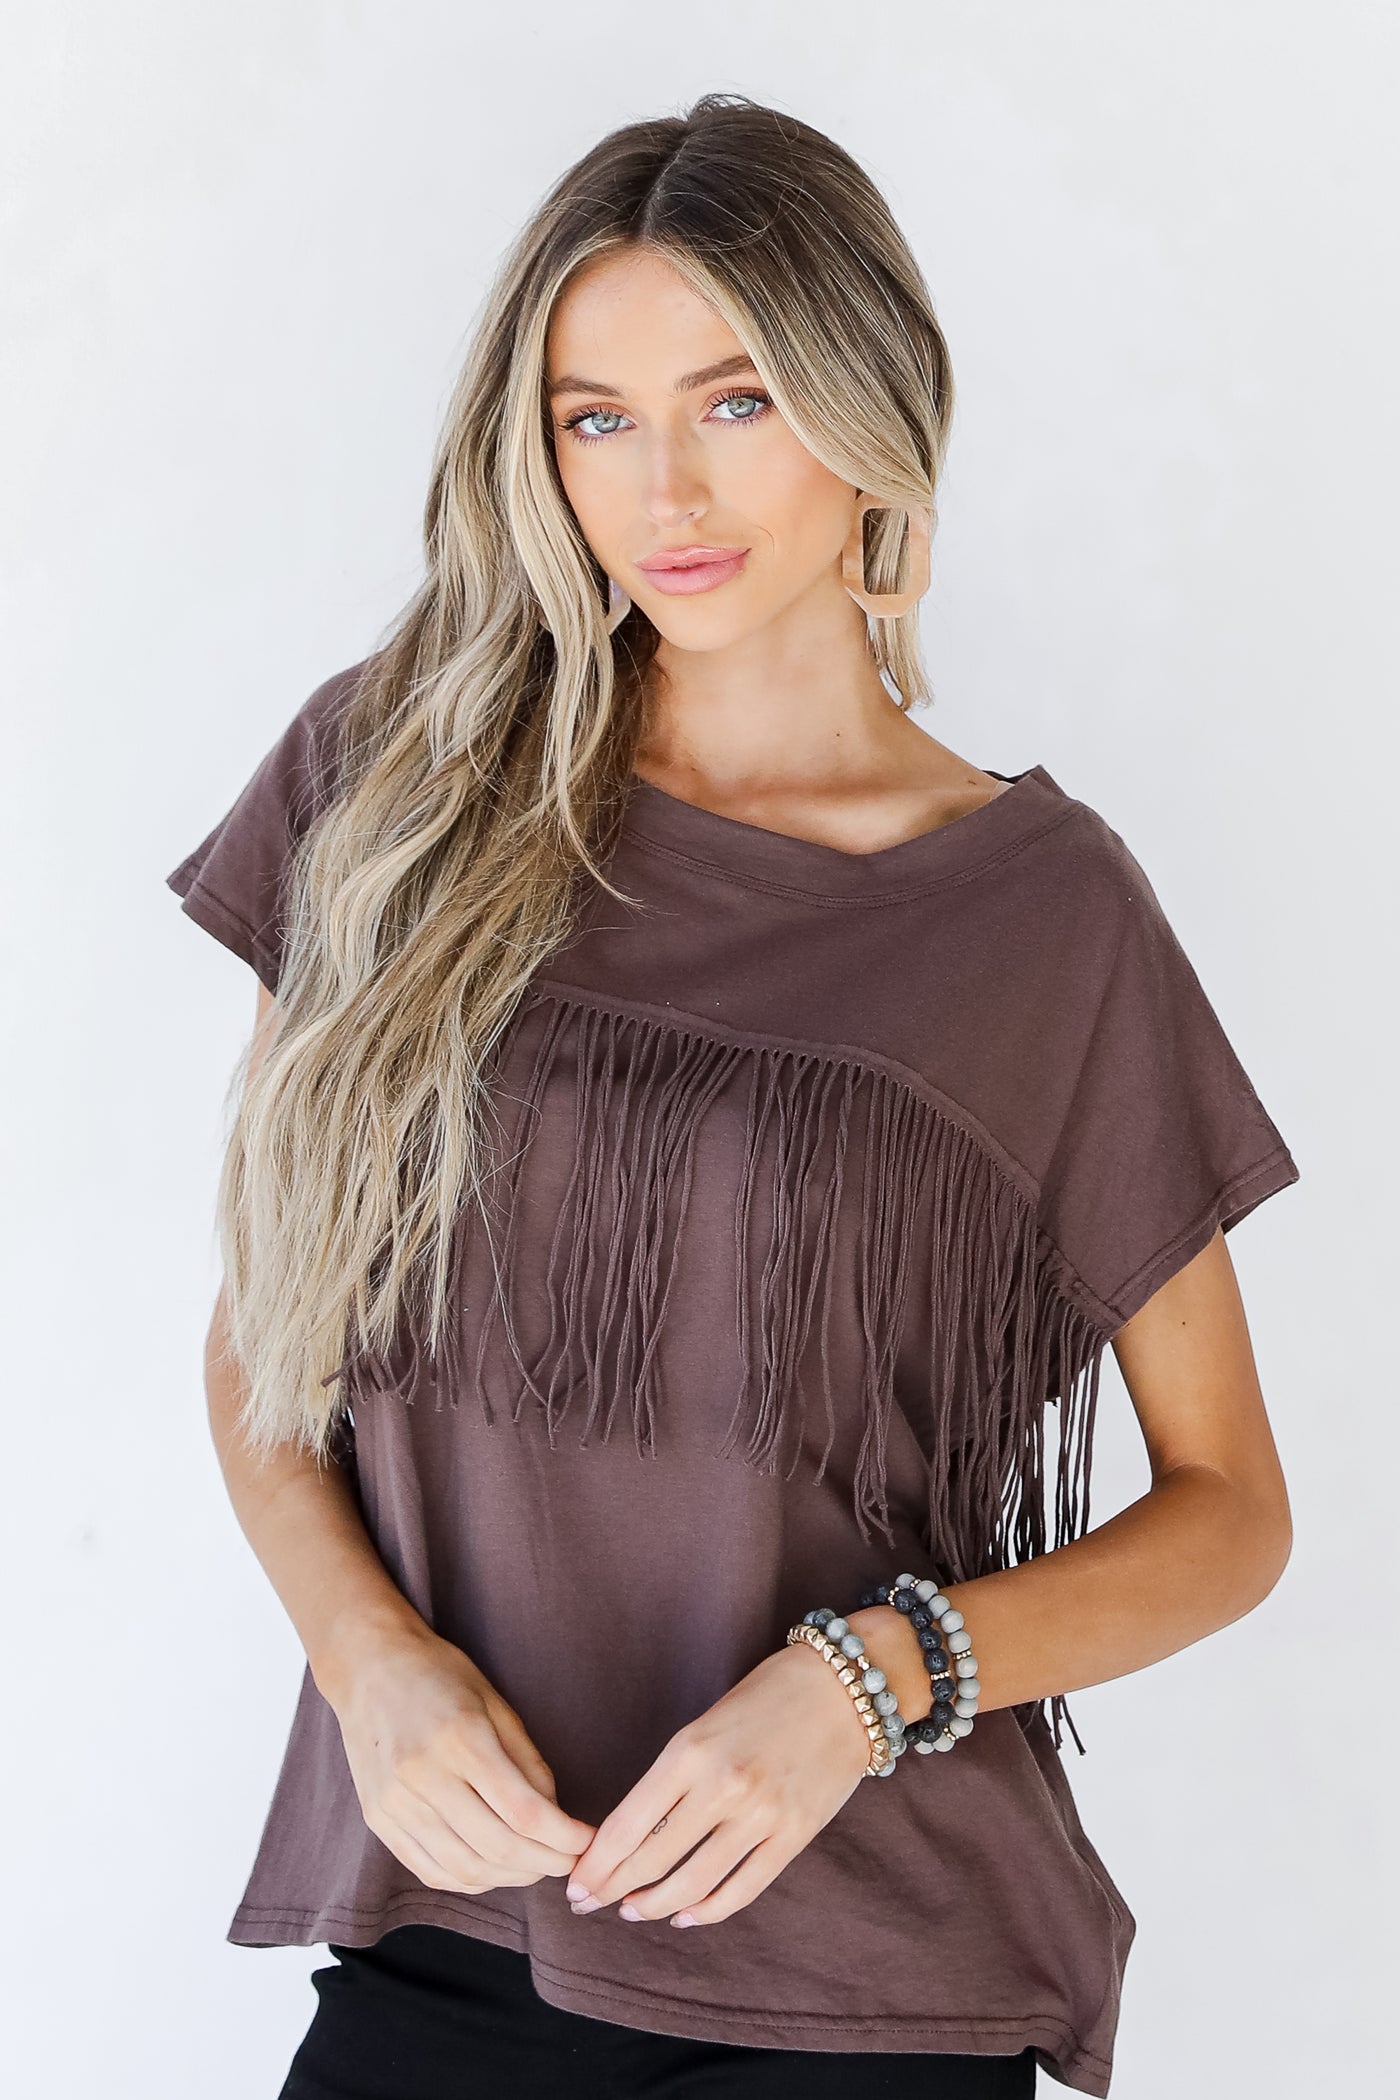 Fringe Top front view